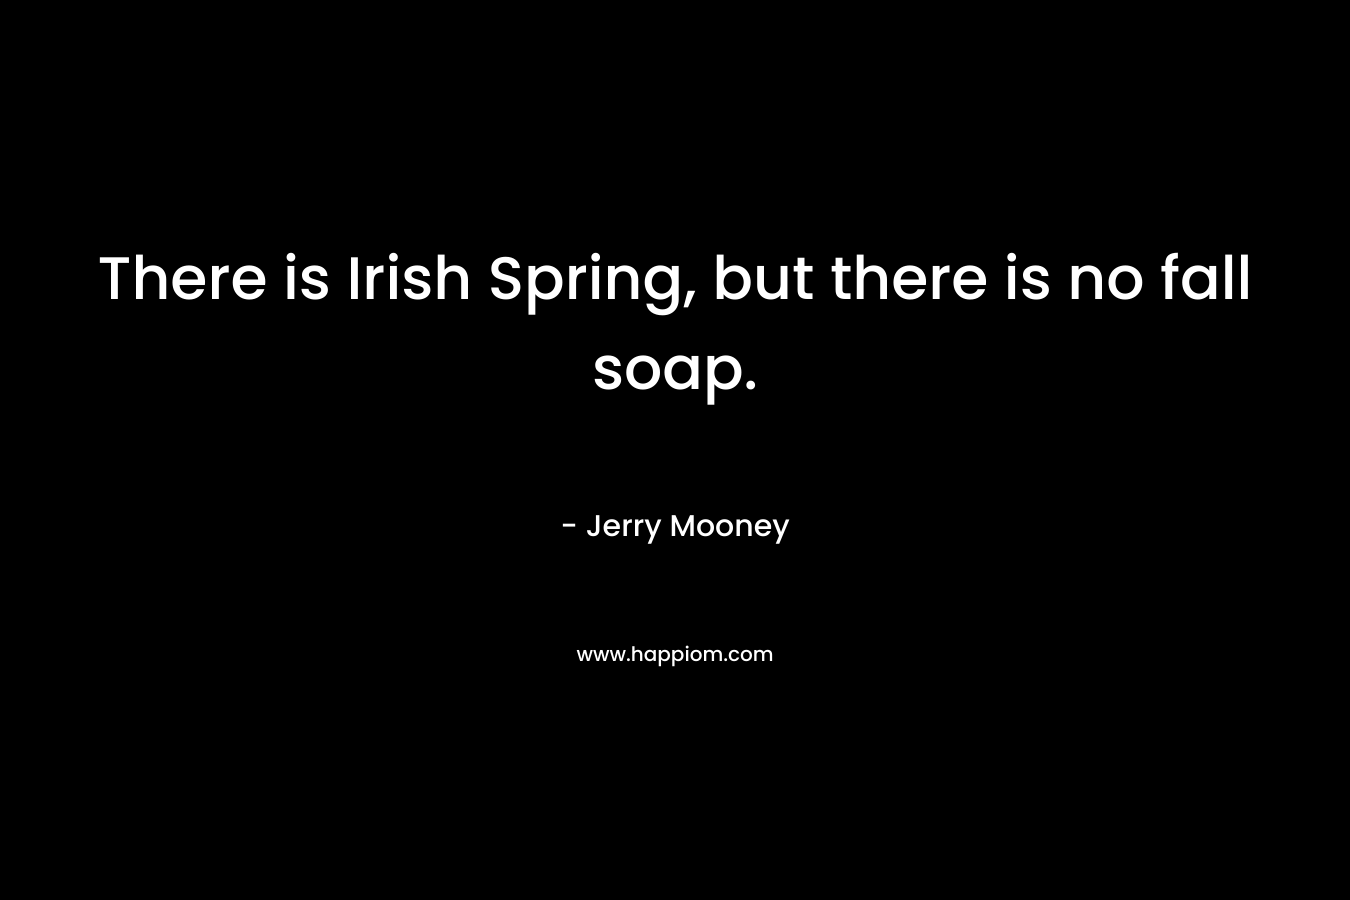 There is Irish Spring, but there is no fall soap. – Jerry Mooney